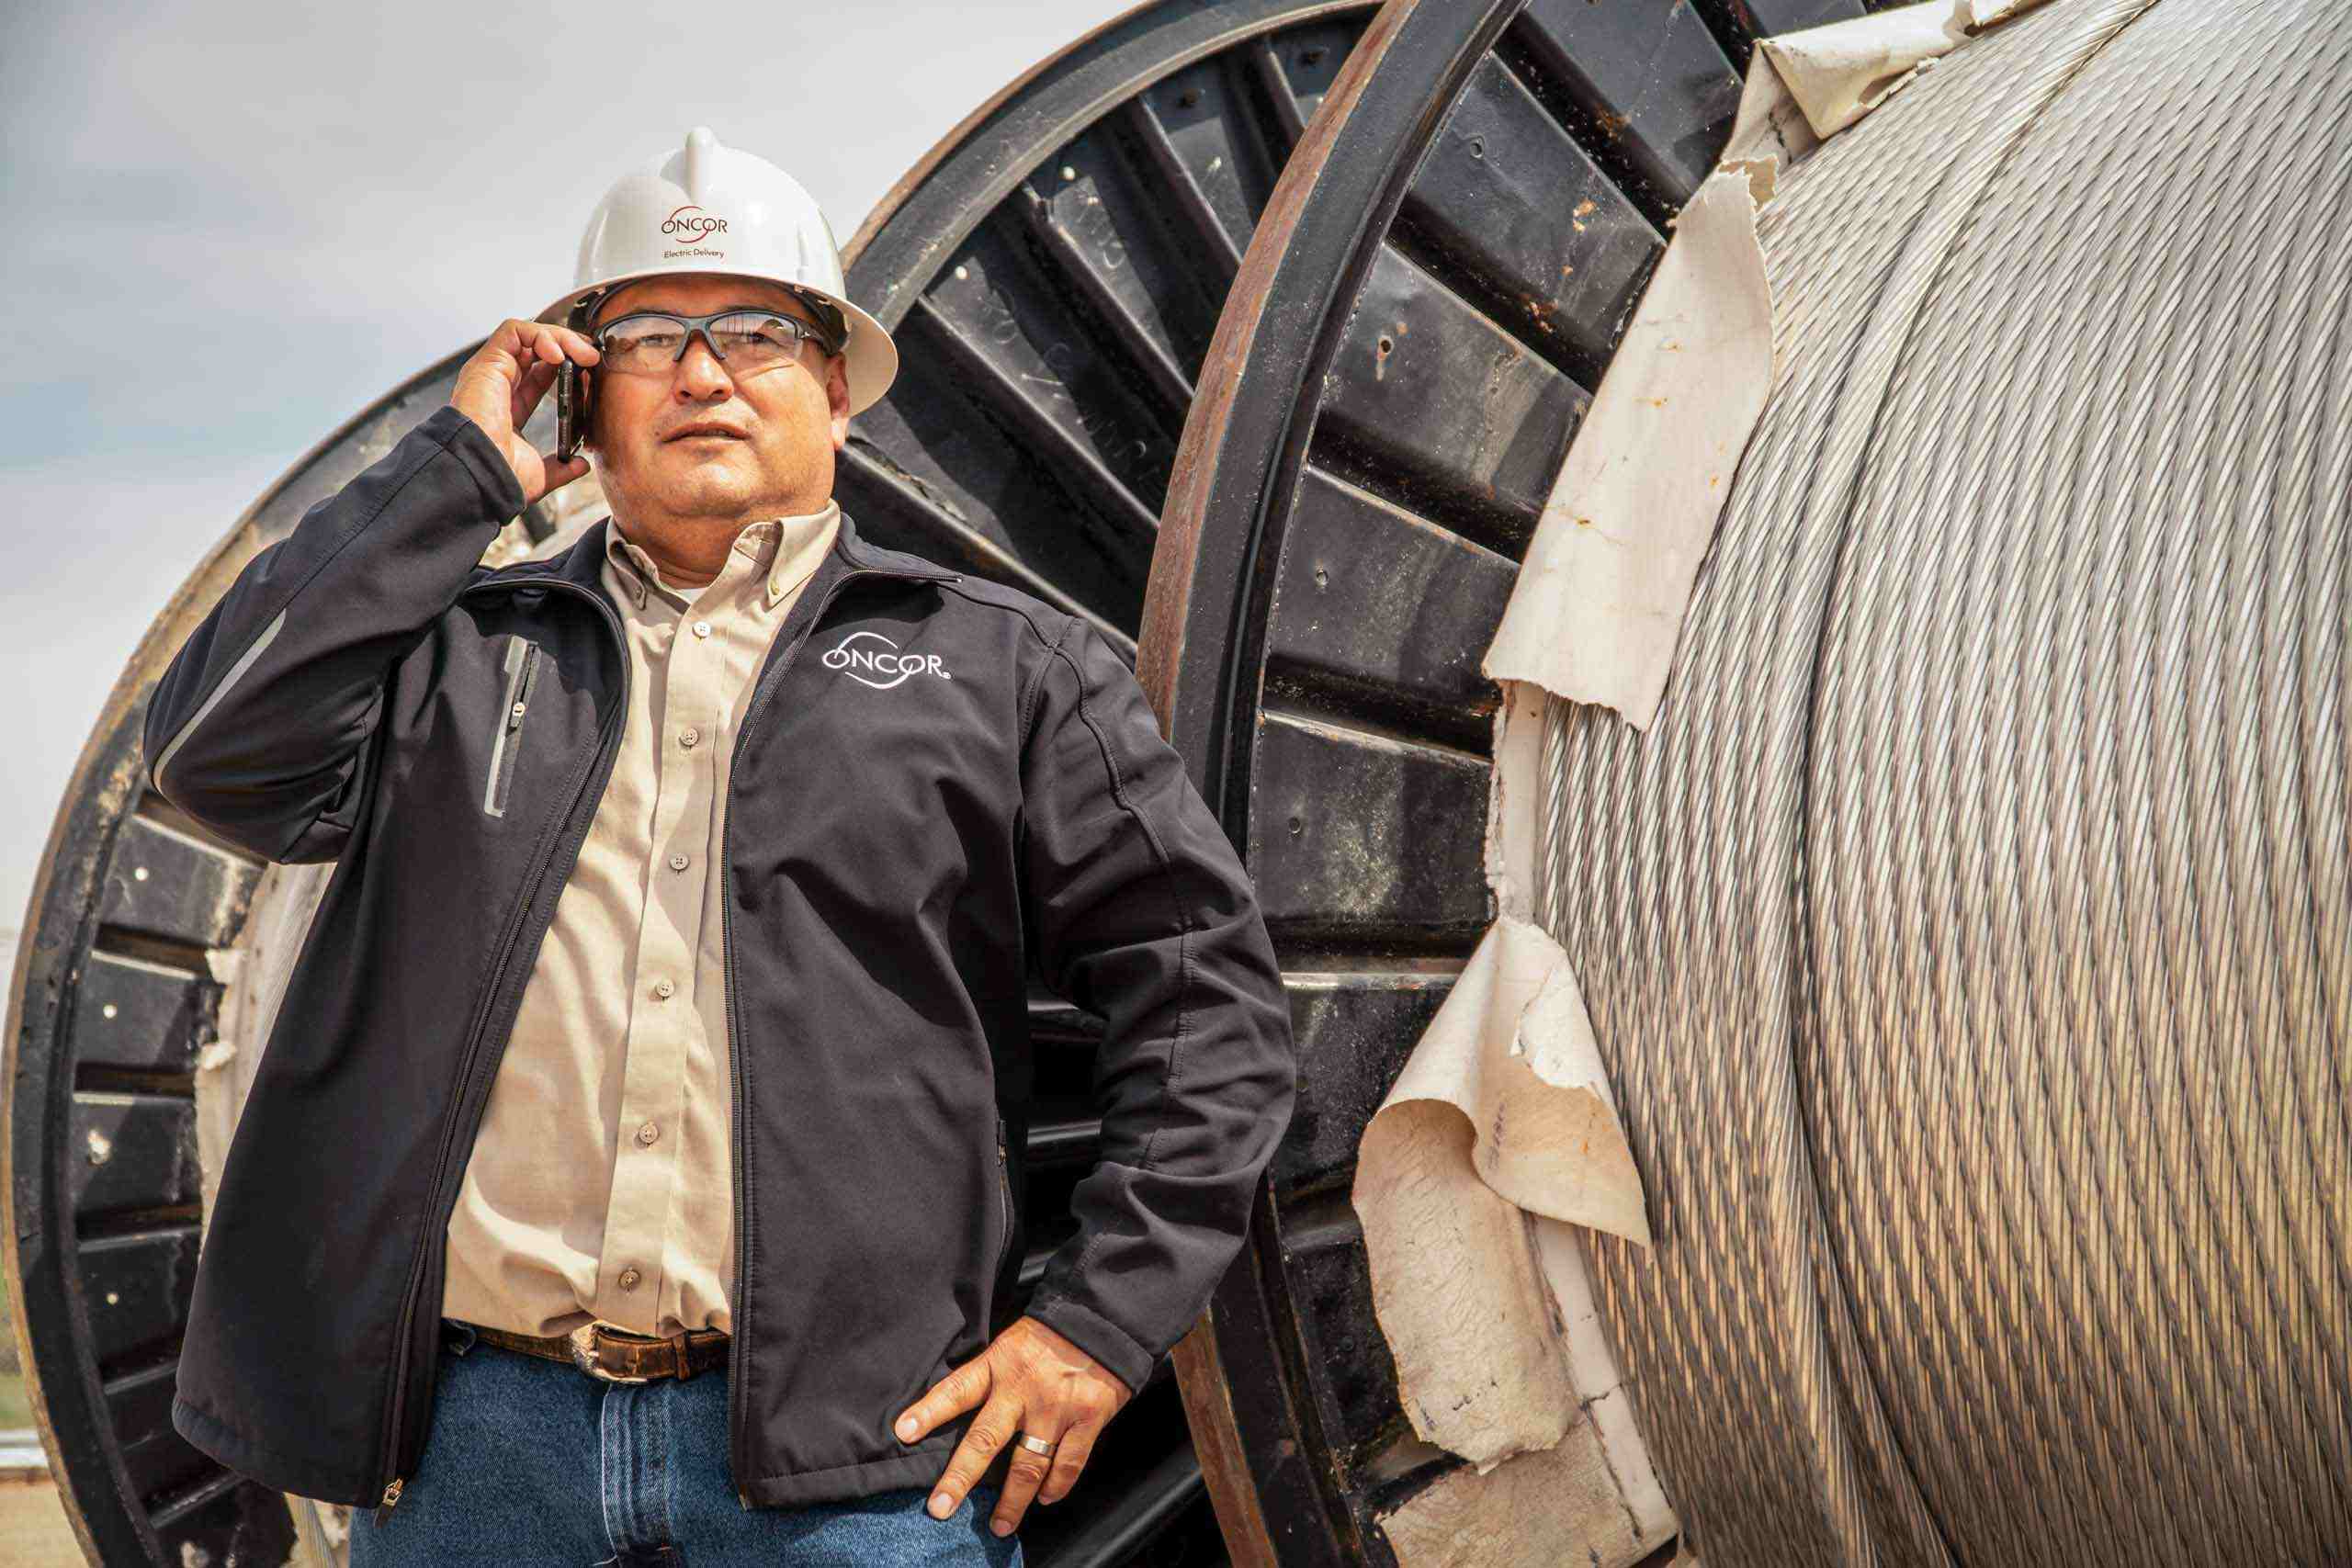 Powerful On-Location Portraits of Oncor Manager amidst Cabling